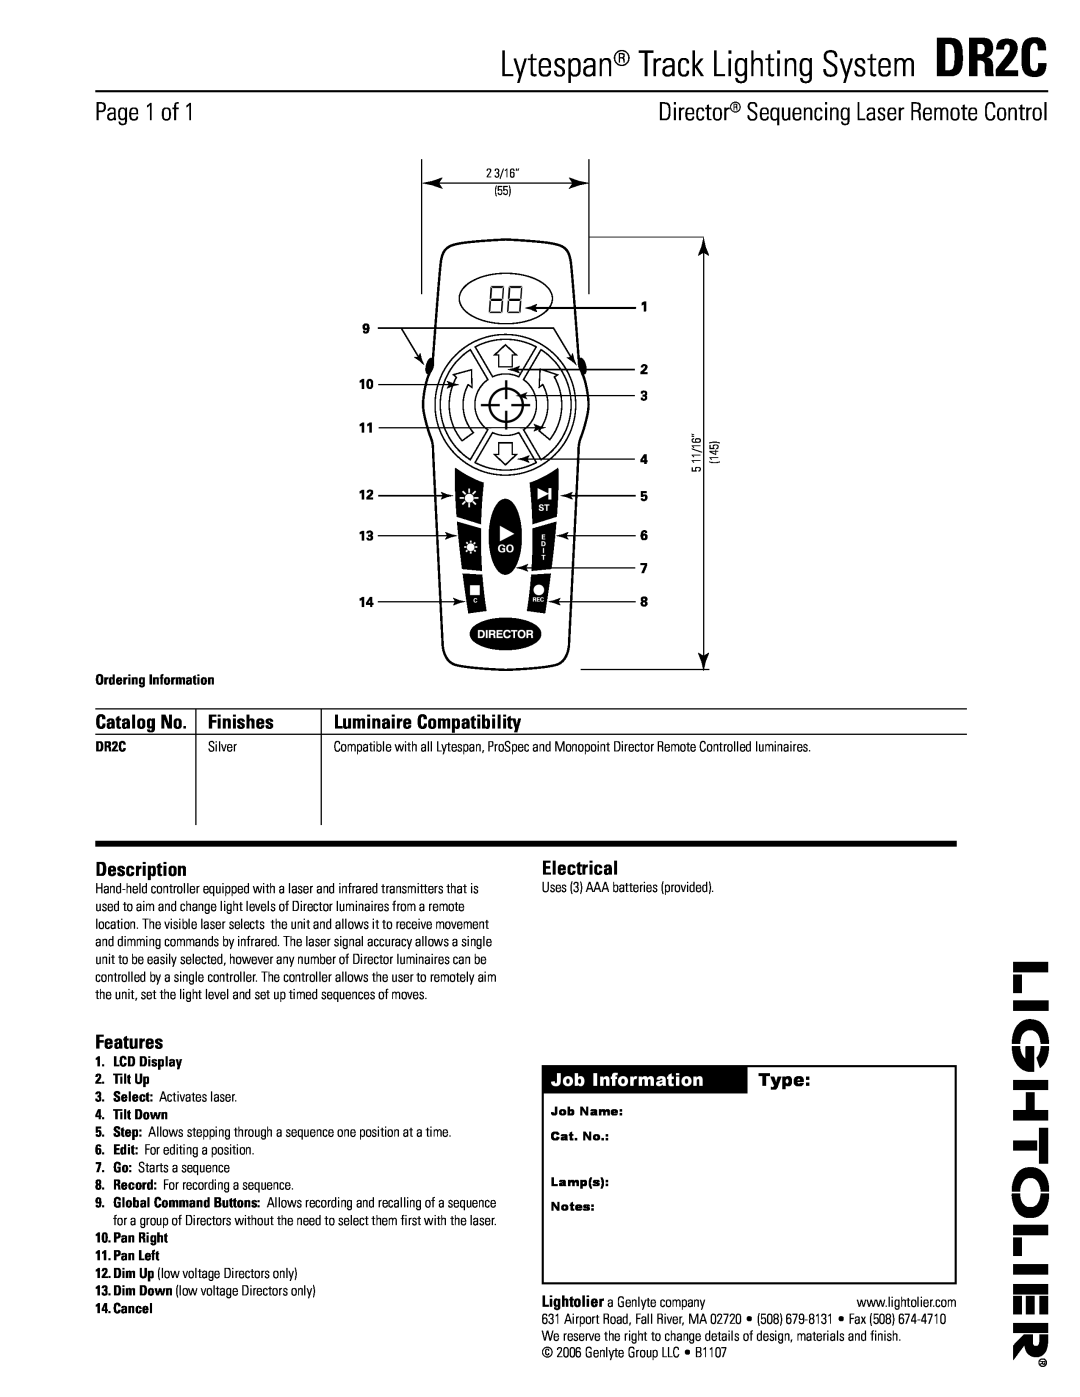 Lightolier DR2C manual Lytespan Track Lighting System dr2c, Page 1 of, Director Sequencing Laser Remote Control, Finishes 